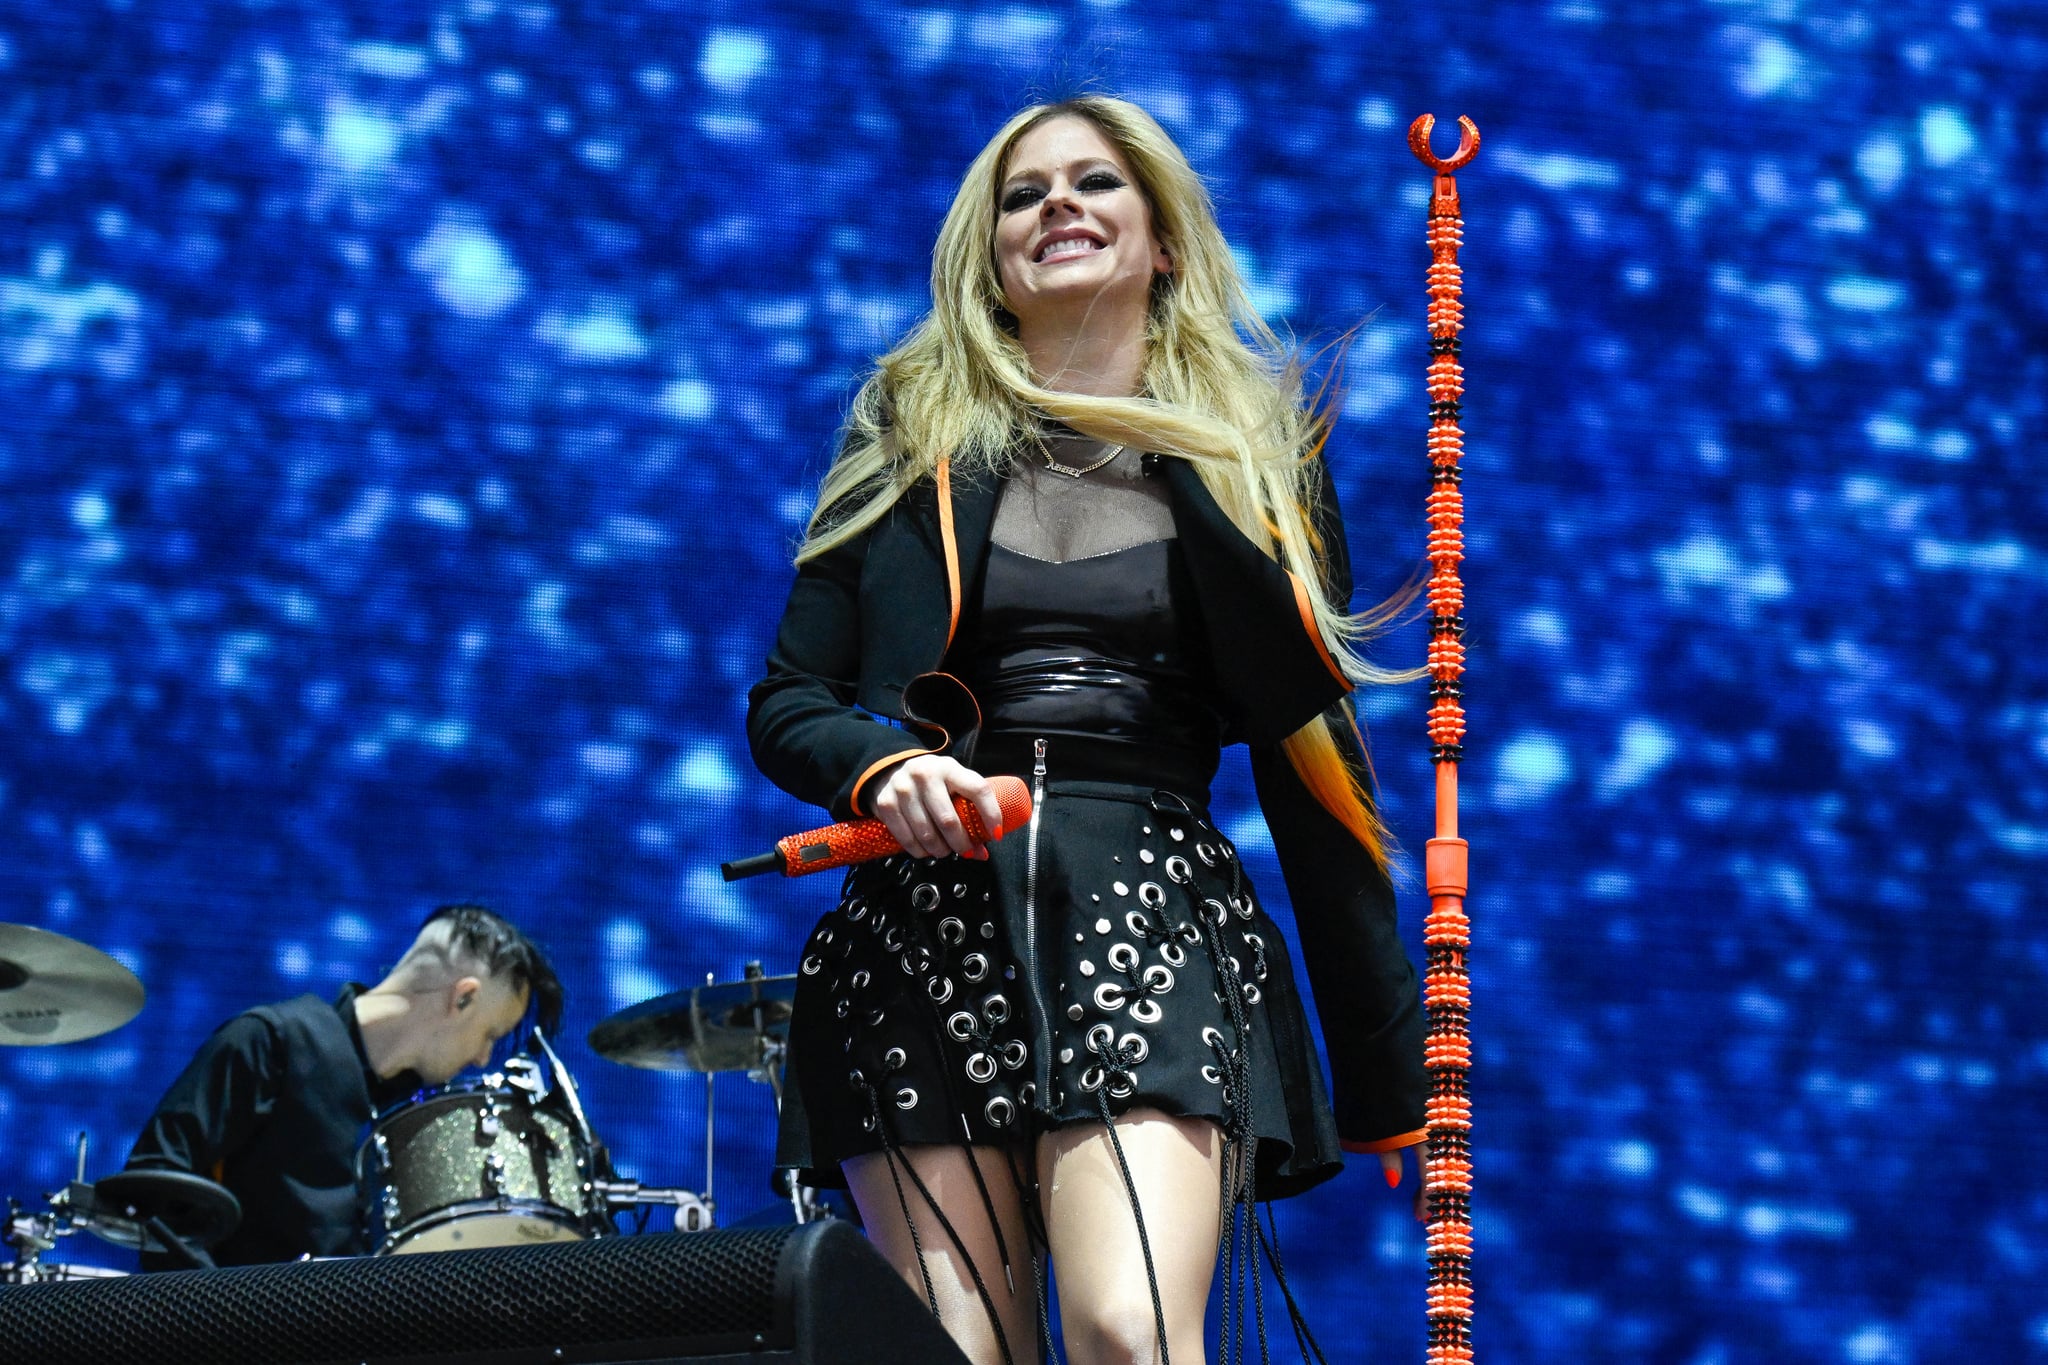 BOSTON, MASSACHUSETTS - MAY 27: Avril Lavigne performs during Boston Calling Music Festival on May 27, 2022 in Boston, Massachusetts. (Photo by Astrida Valigorsky/Getty Images)